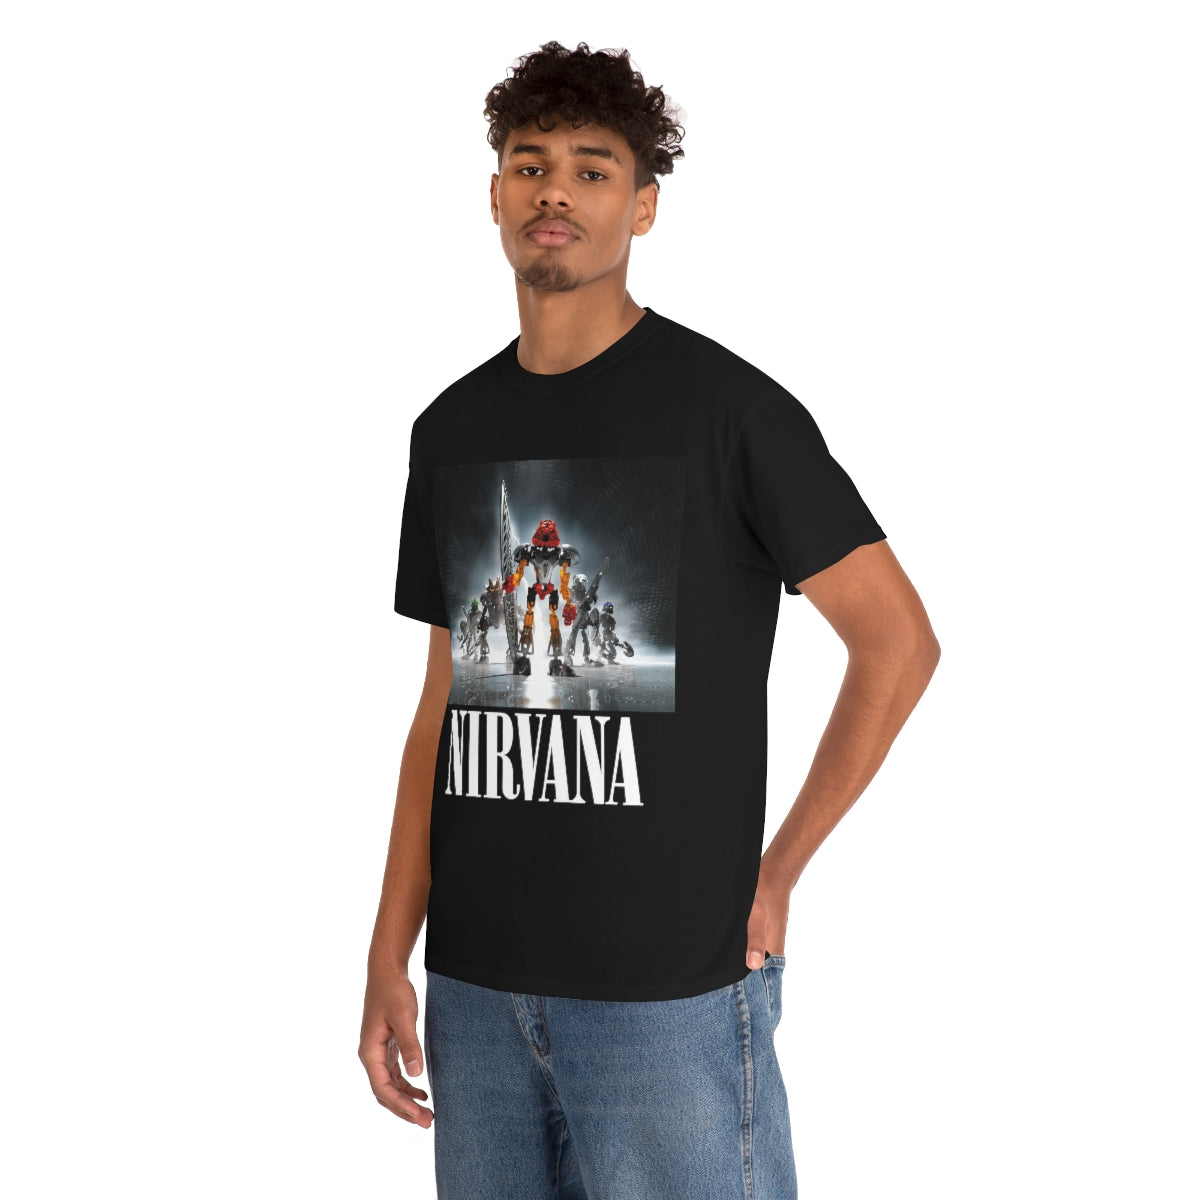 The Official Bionicle Nirvana Shirt (Black)